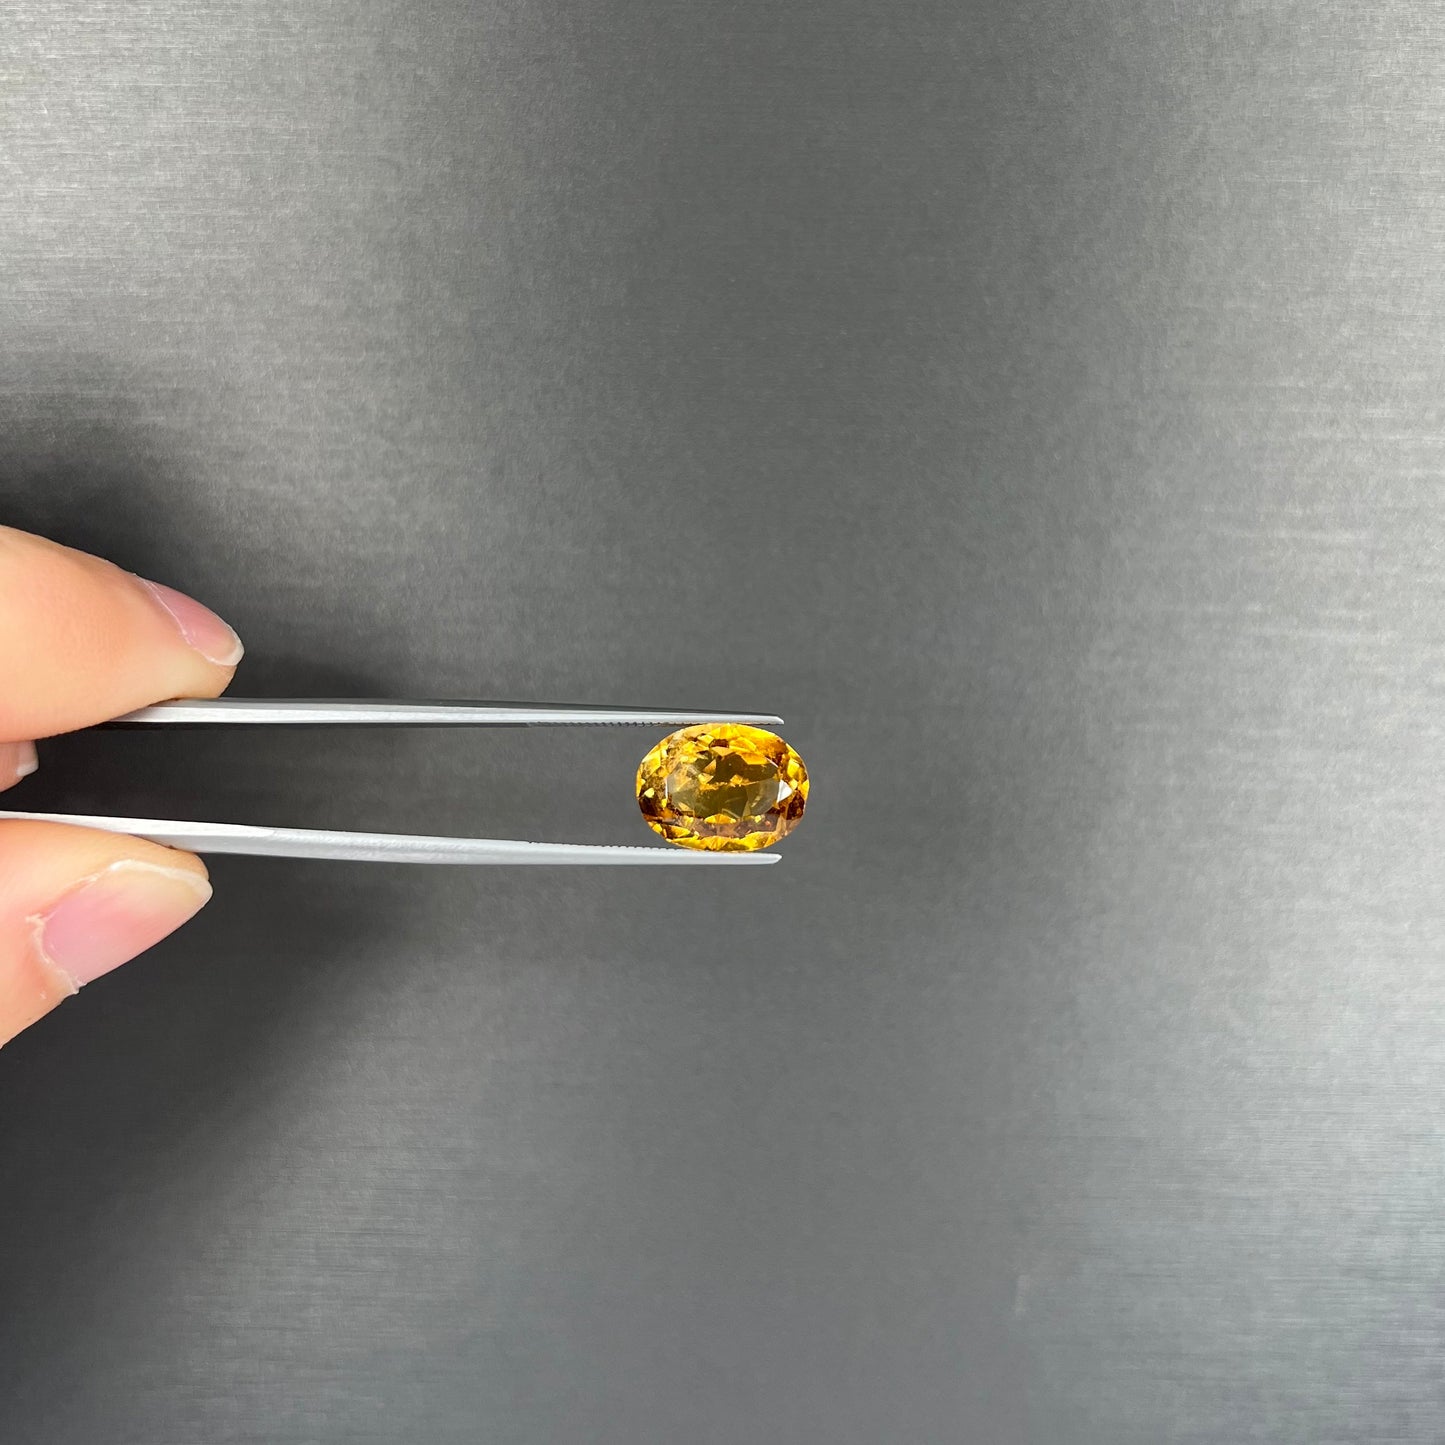 A loose, oval cut citrine gemstone.  The stone is heavily included and roughly cut.